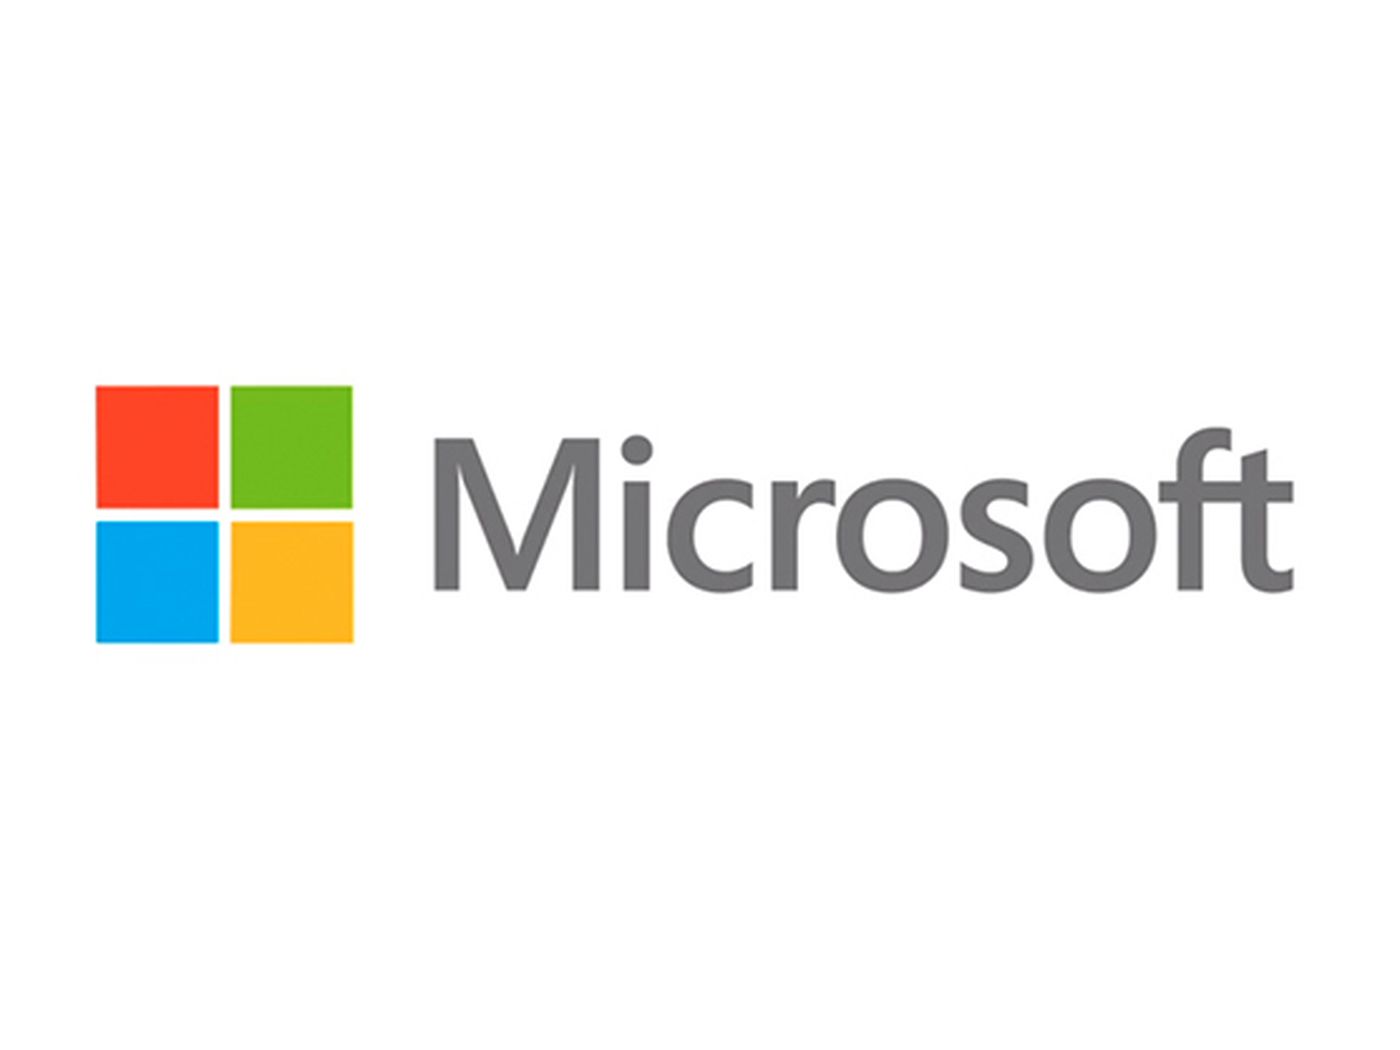 Microsoft | WINPROMY CONSULTANCY SDN BHD. (1065242-V) All Rights Reserved.